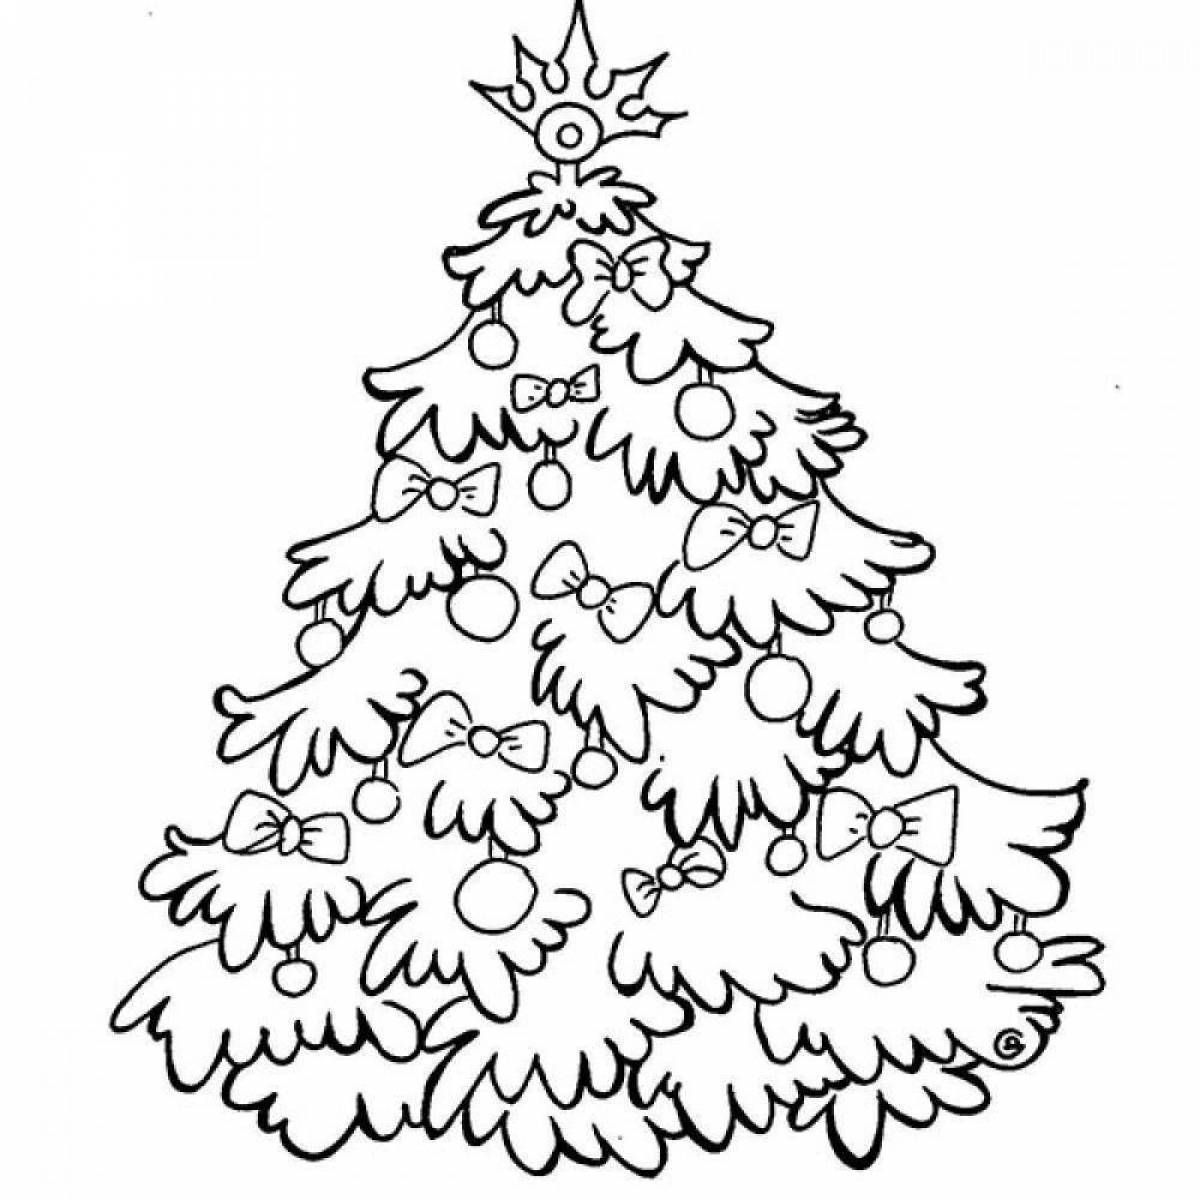 Colorful Christmas tree coloring book for 5-6 year olds